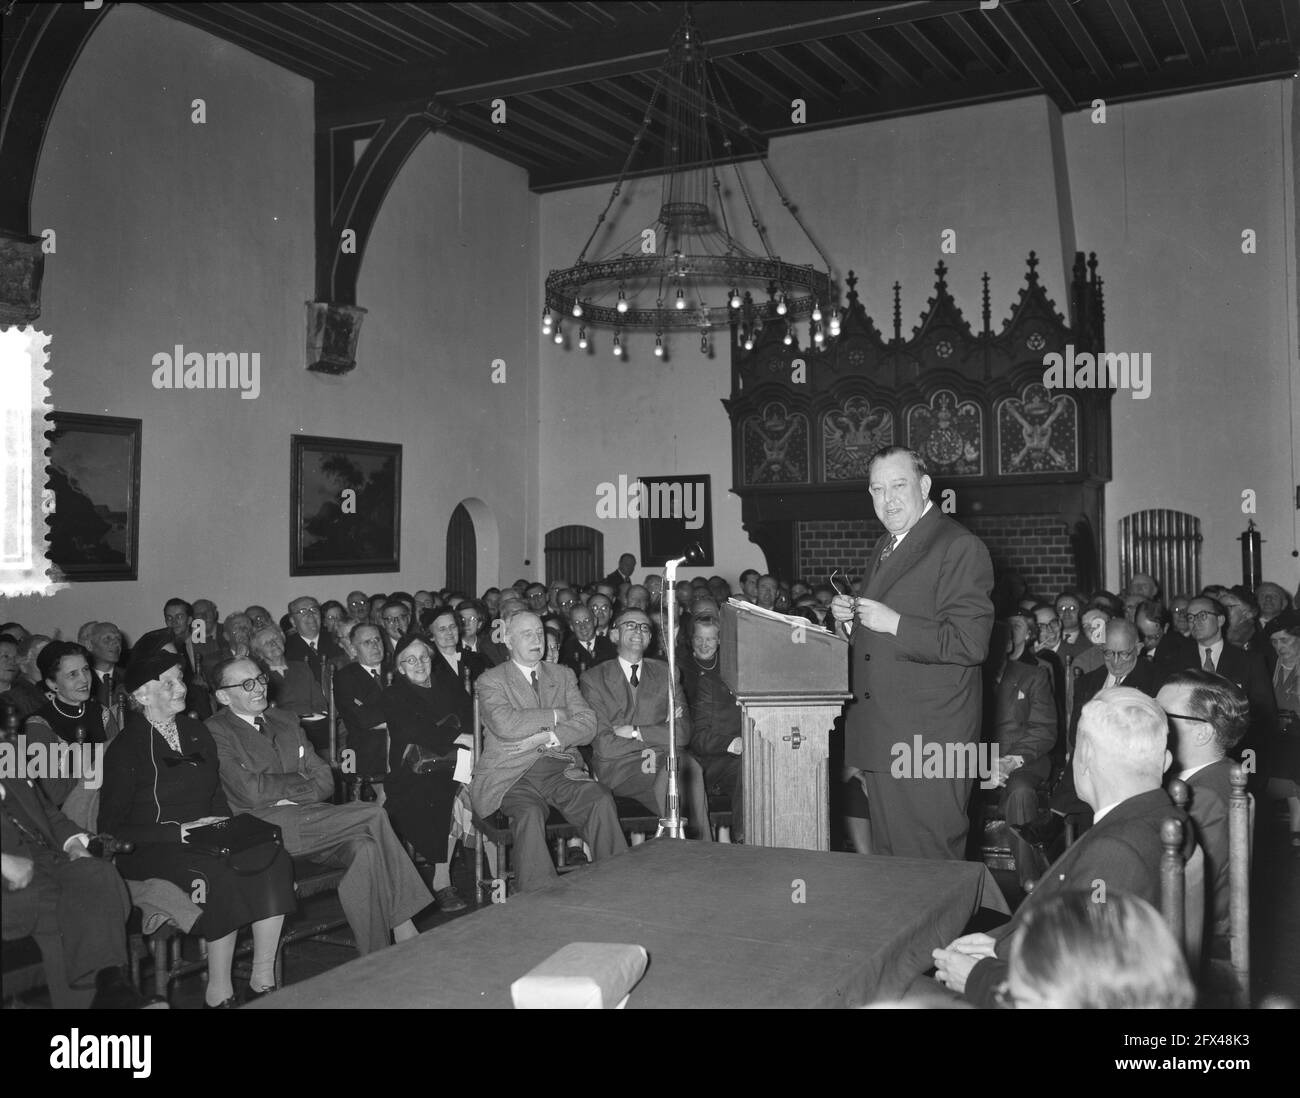 The former Secretary-General of the United Nations, Trygve Lie, delivers a speech in the roll call room at the Binnenhof in The Hague before the Association for International Legal Order and the Society for International Tasks, November 18, 1954, international affairs, speeches, The Netherlands, 20th century press agency photo, news to remember, documentary, historic photography 1945-1990, visual stories, human history of the Twentieth Century, capturing moments in time Stock Photo